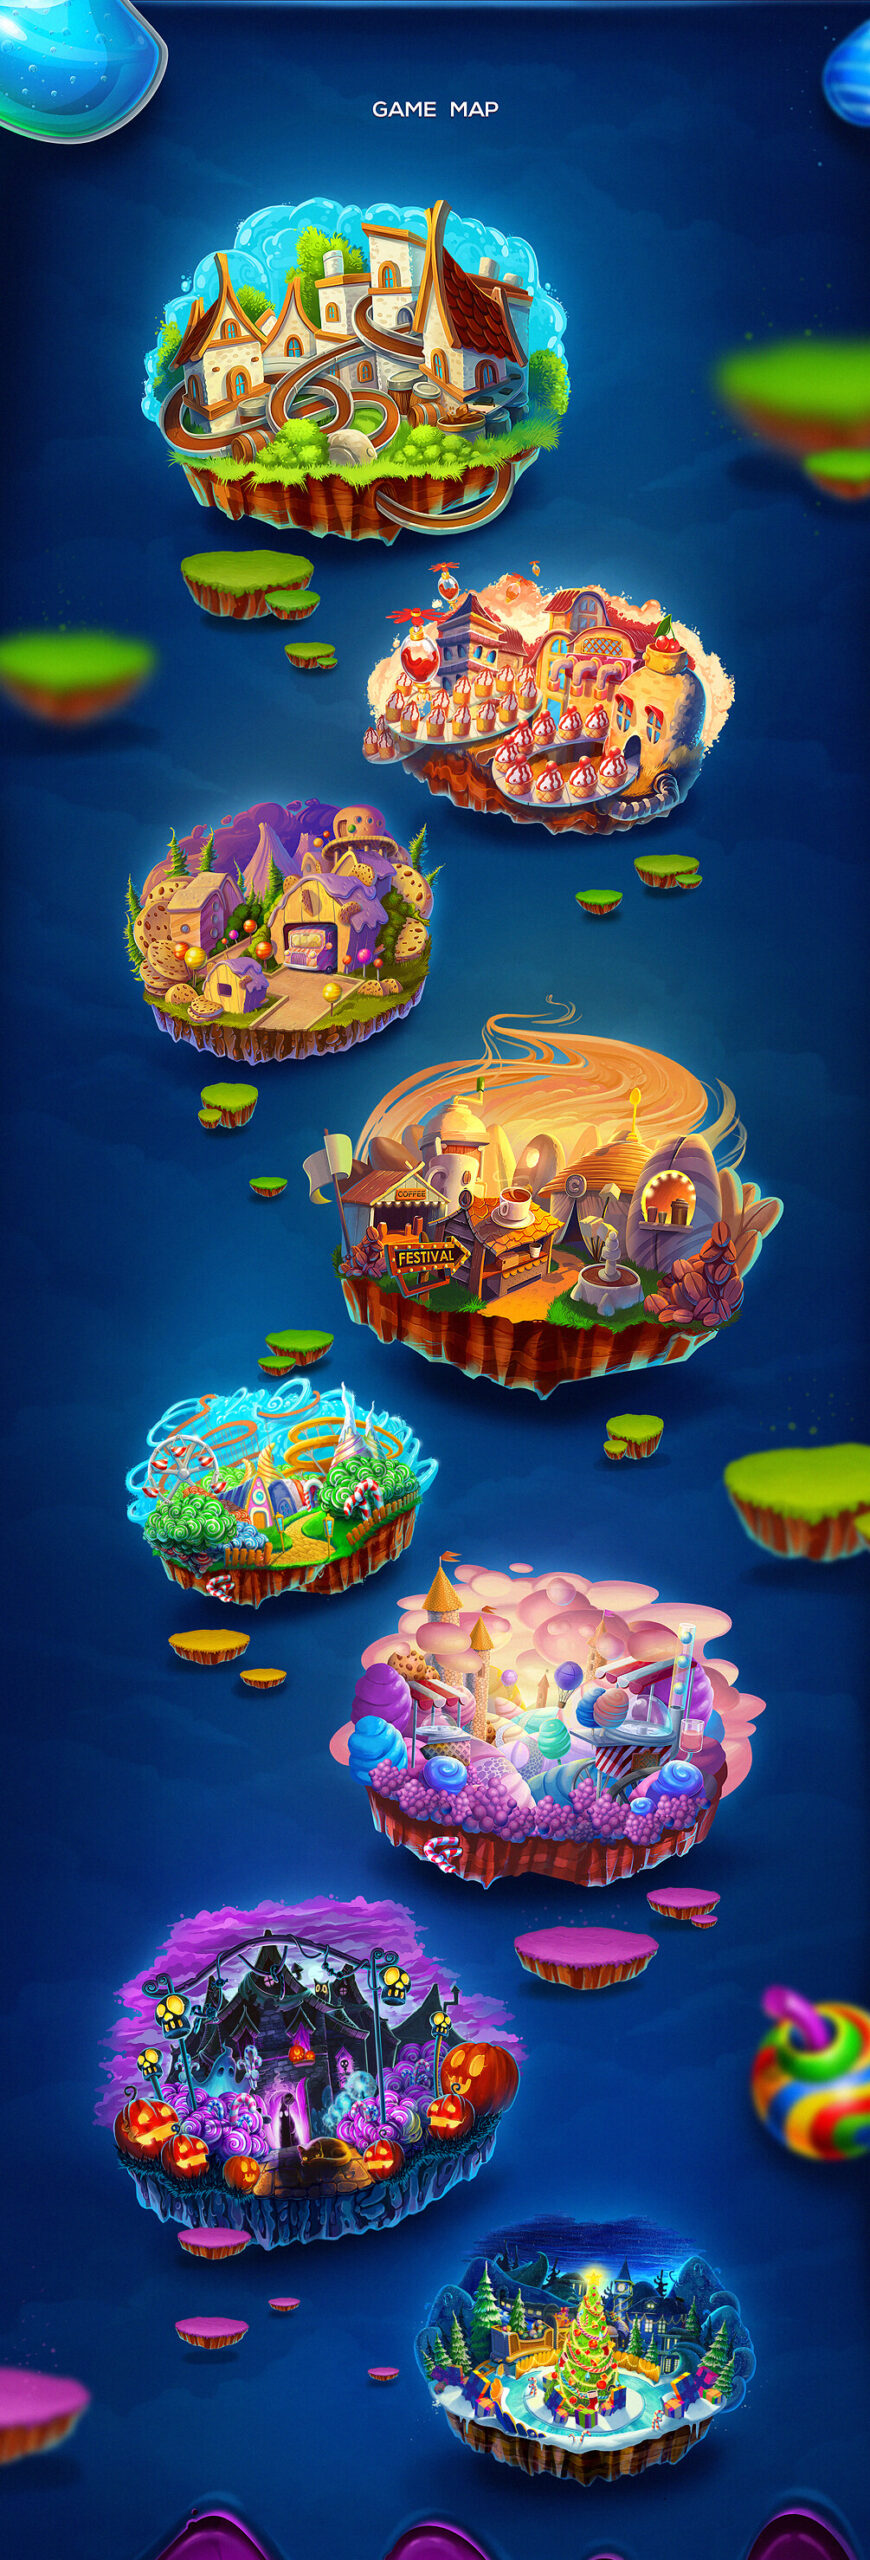 Candy Cruise game map design